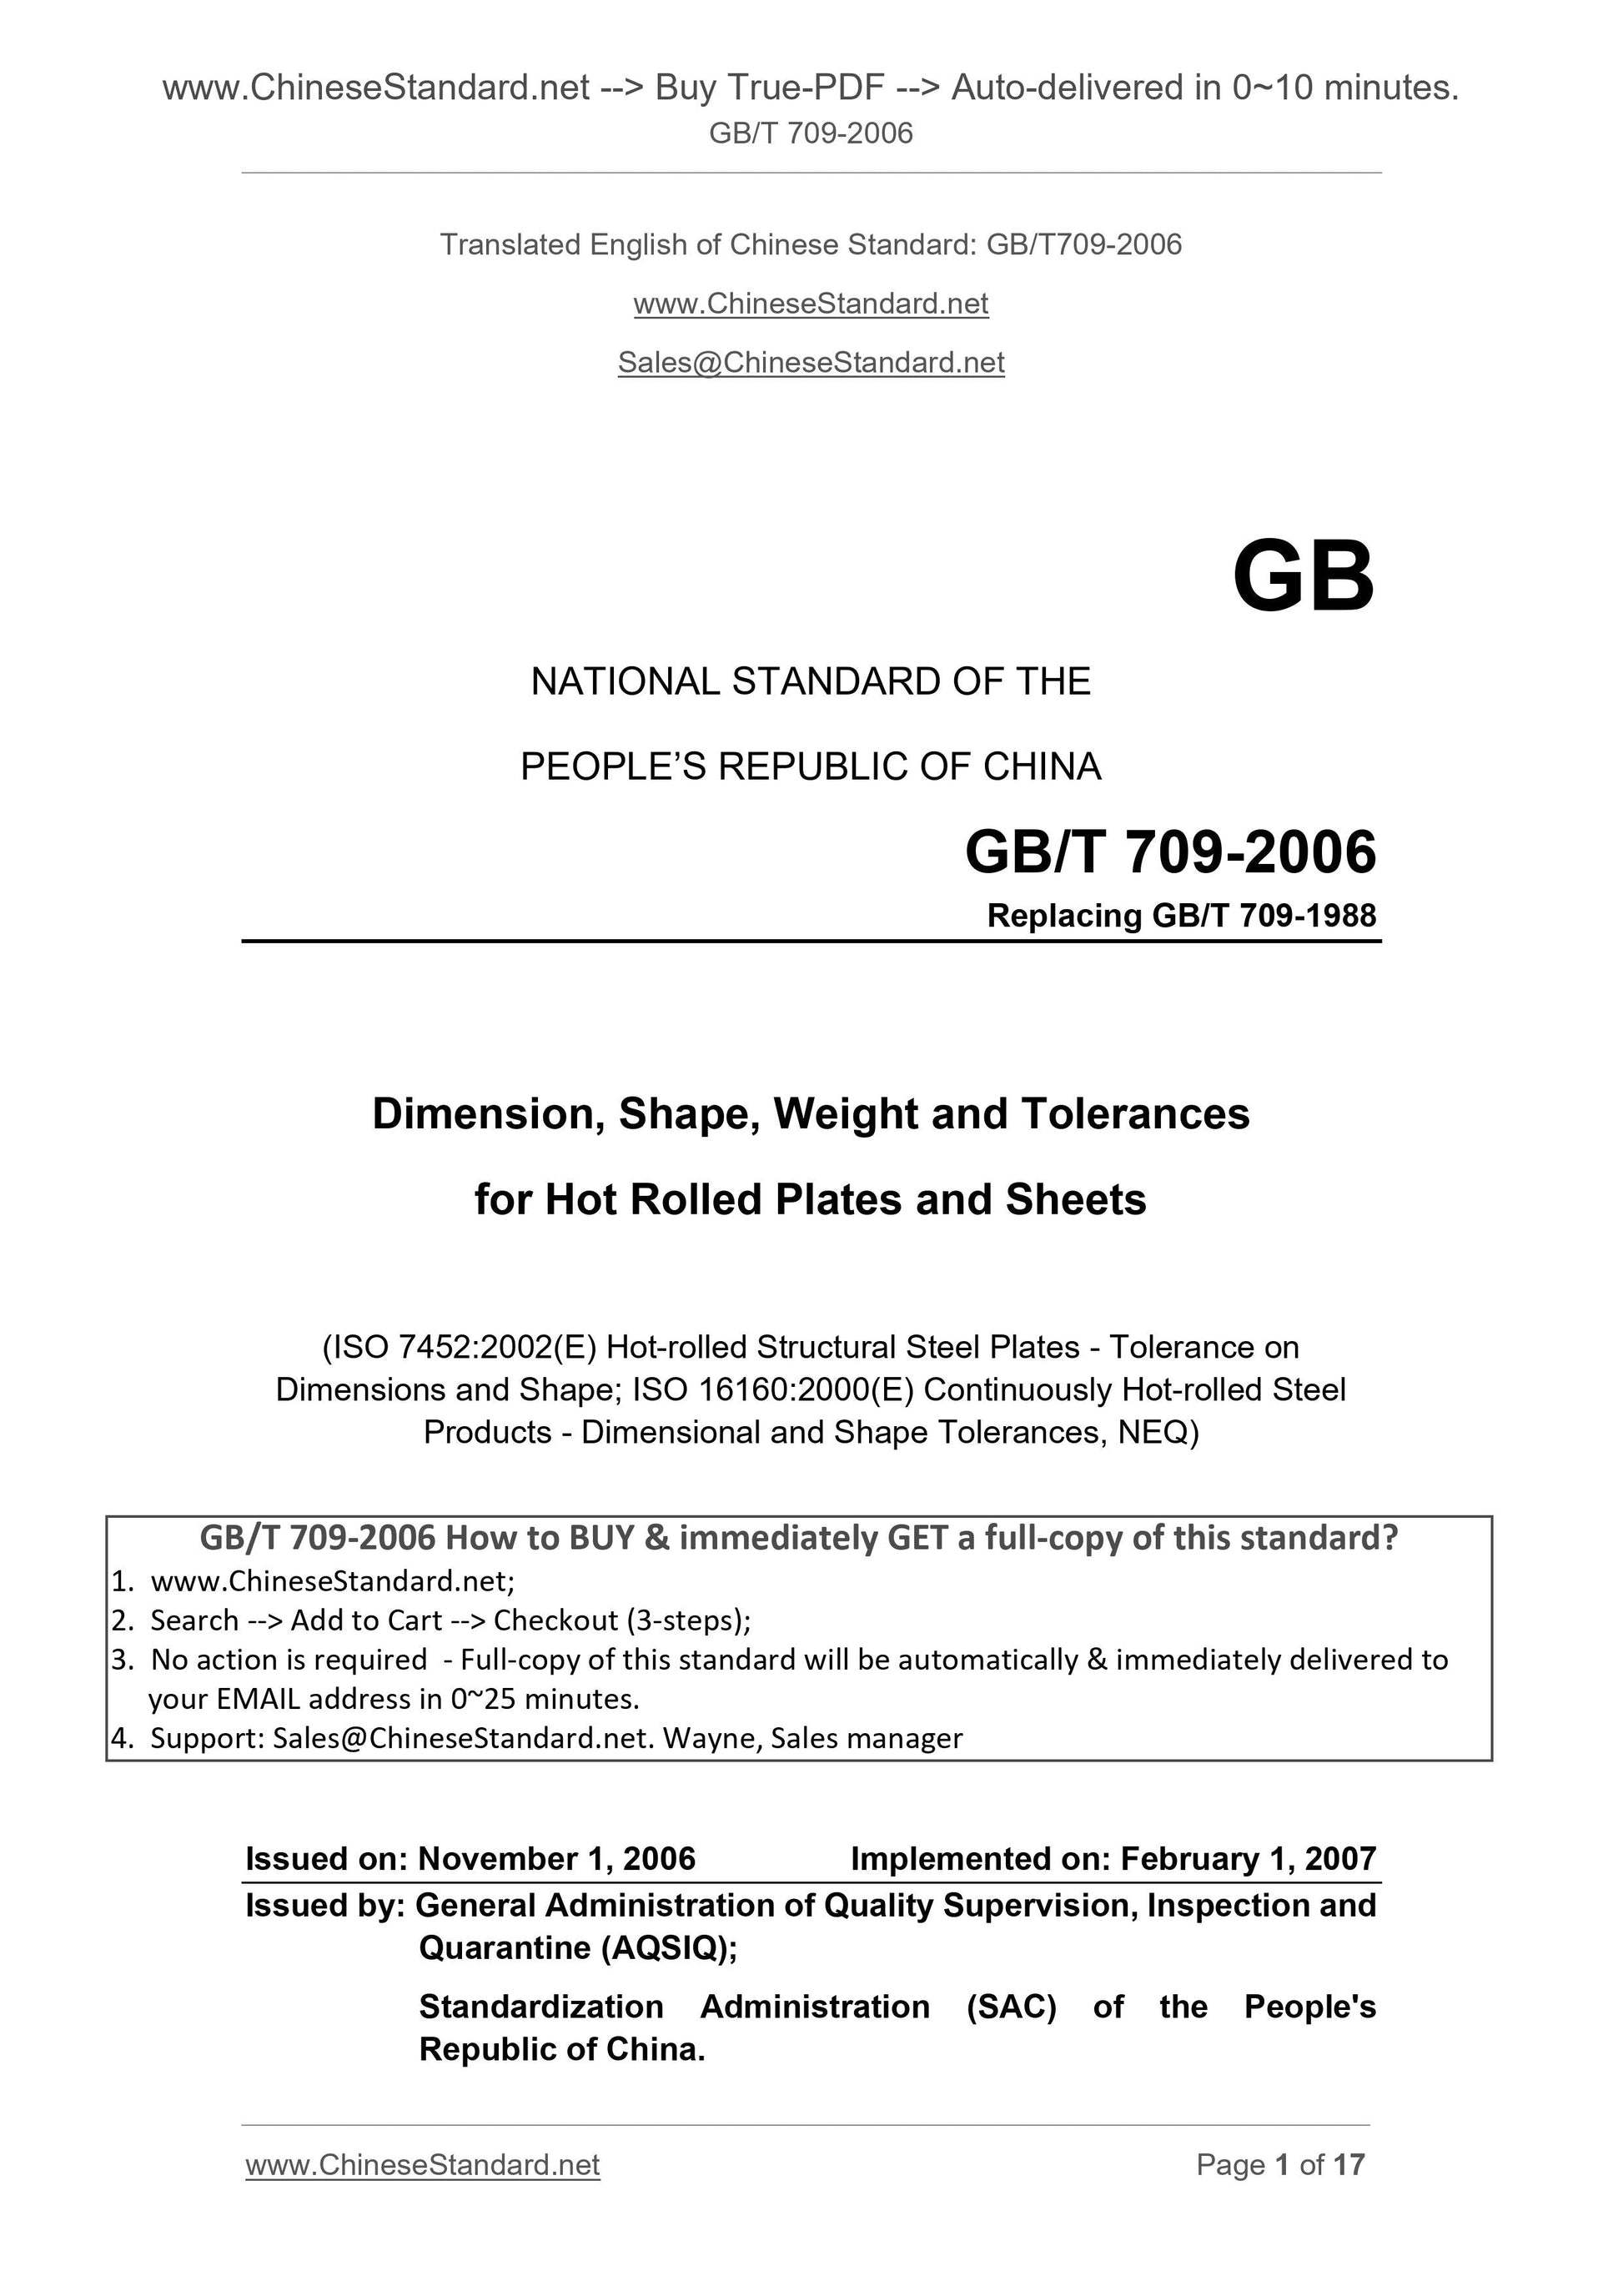 GB/T 709-2006 Page 1